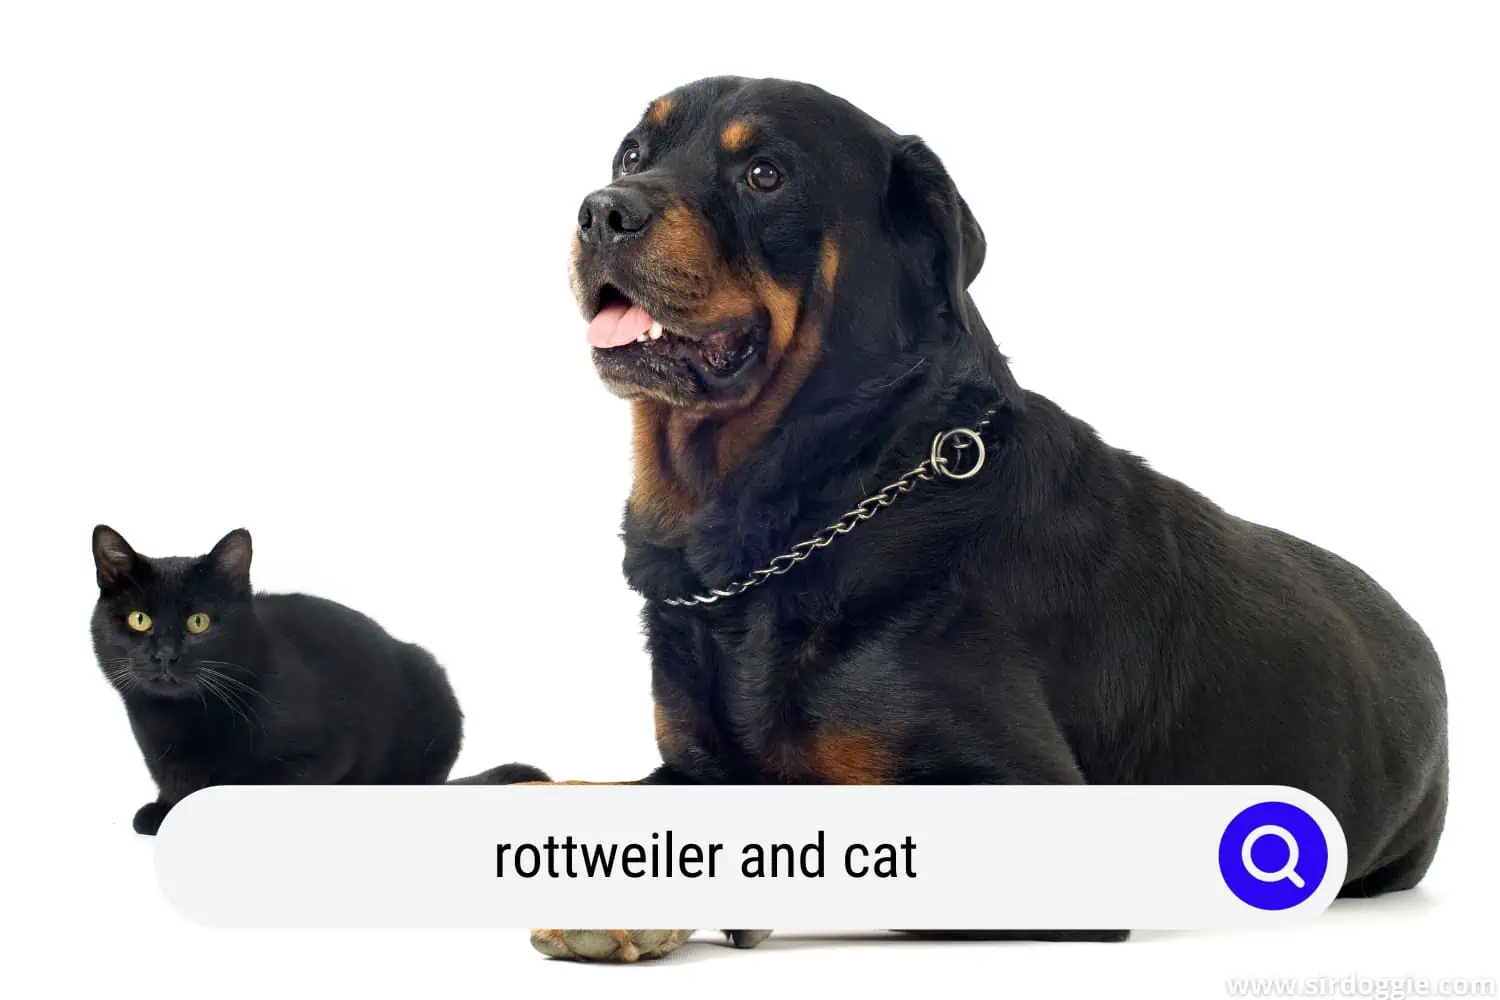 rottweilers and cats